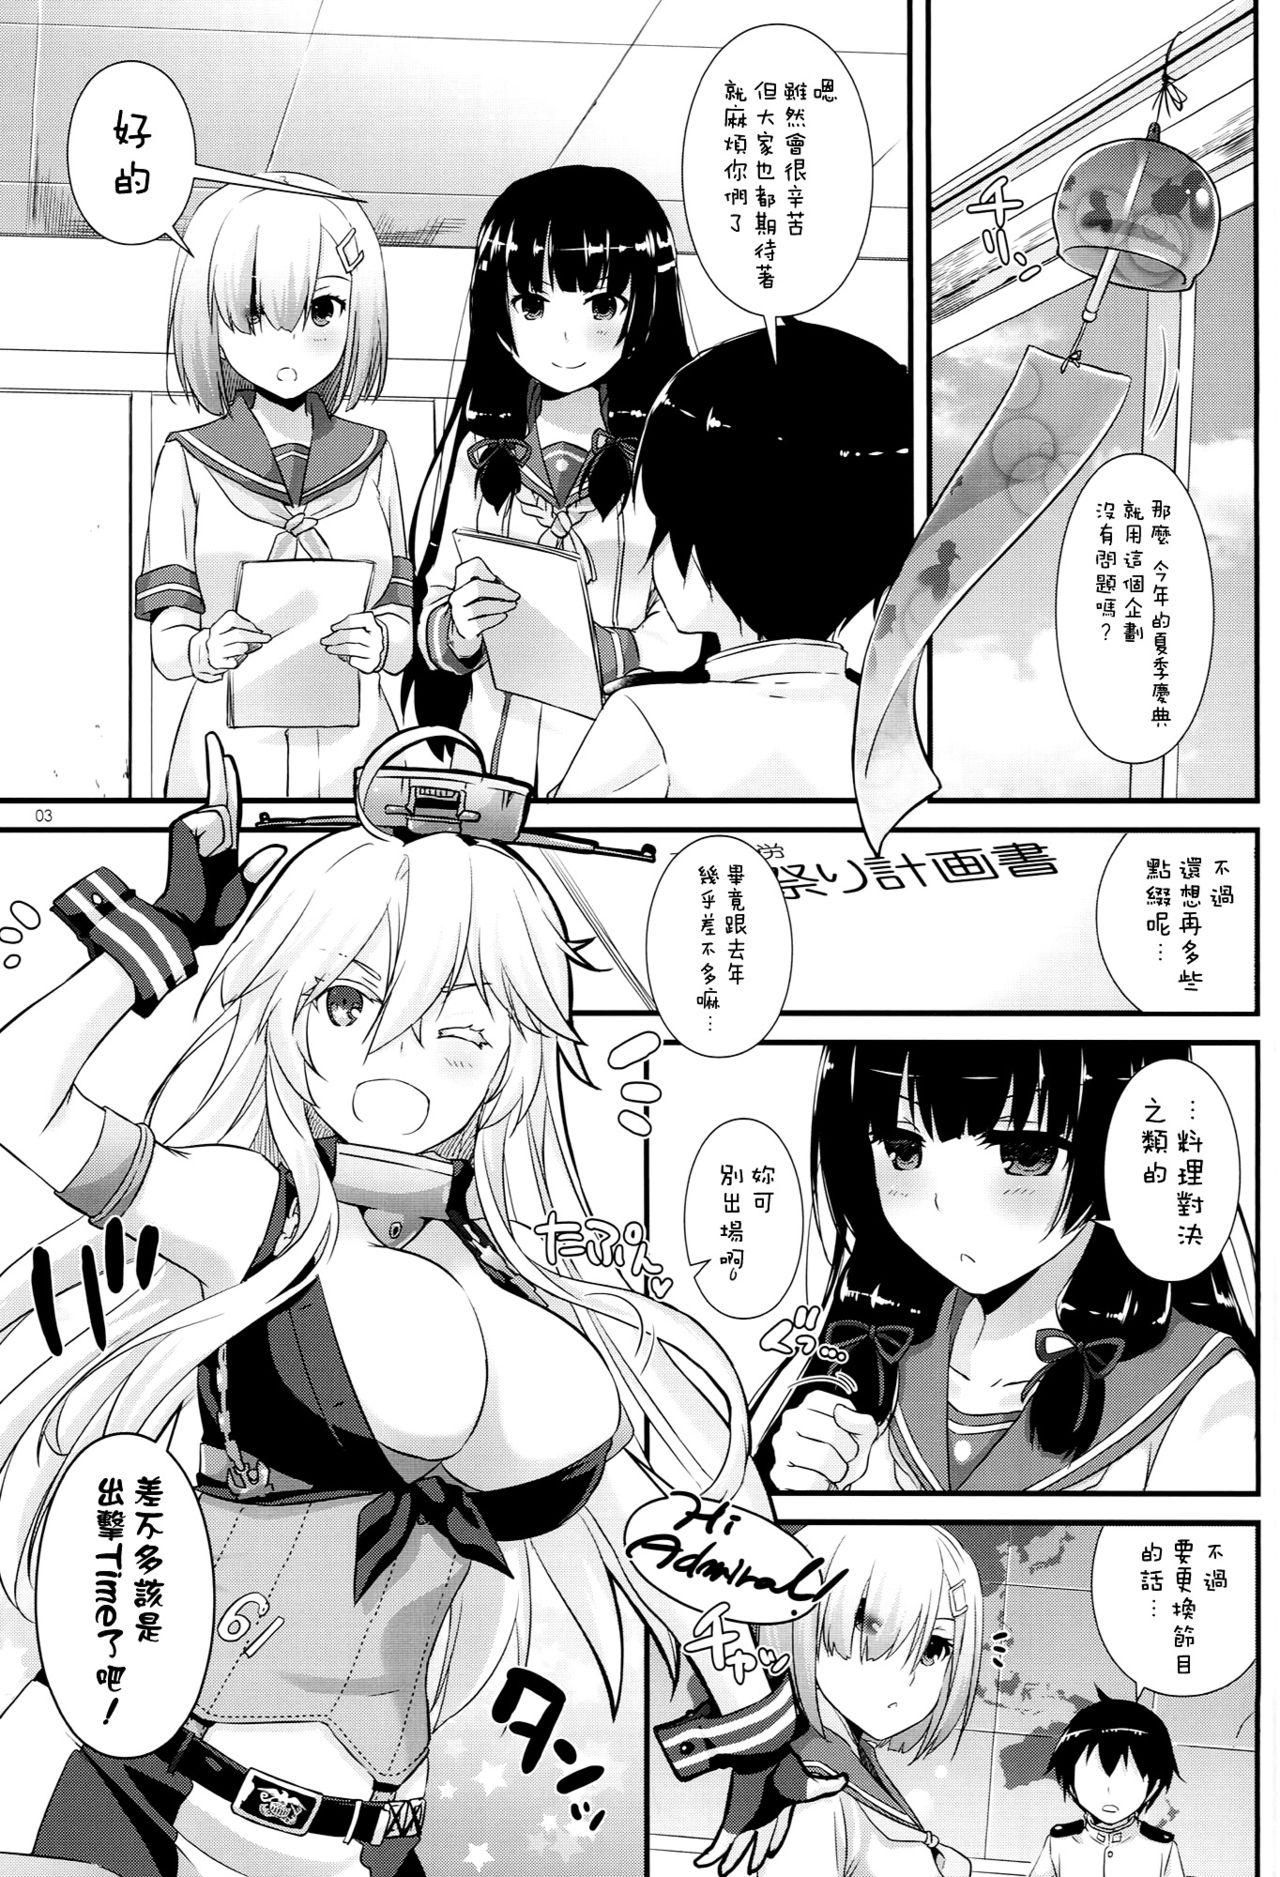 Gros Seins D.L. action 108 - Kantai collection Stepmom - Page 3